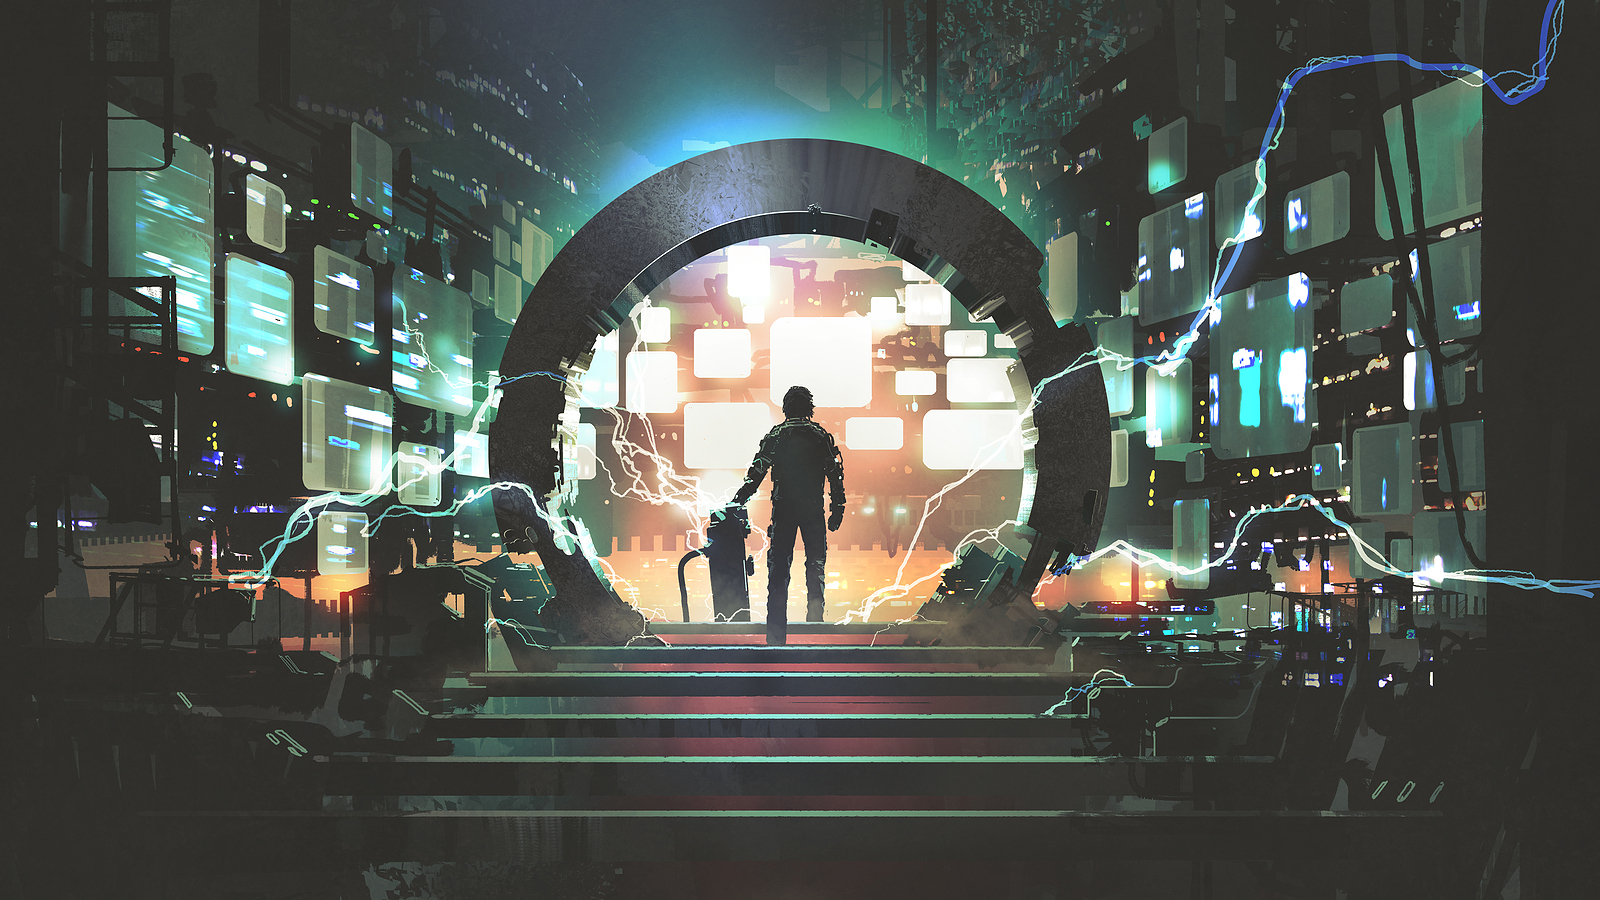 A scifi scene with a machine in the center being lit with electricity and a figure approaching it